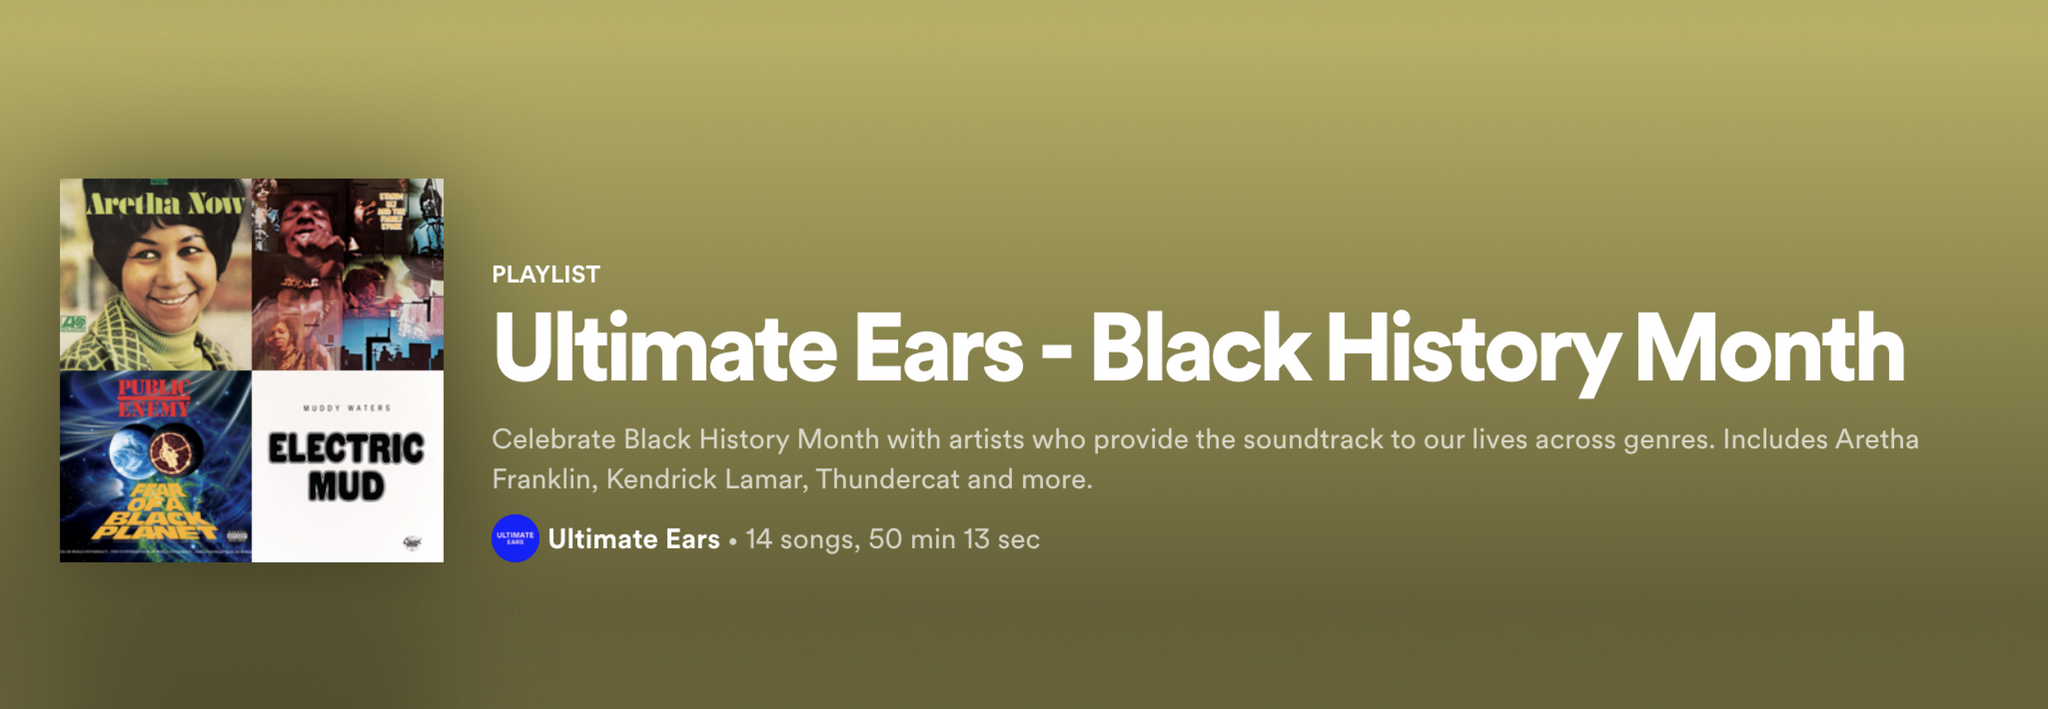 Ultimate Ears Black History Month Playlist